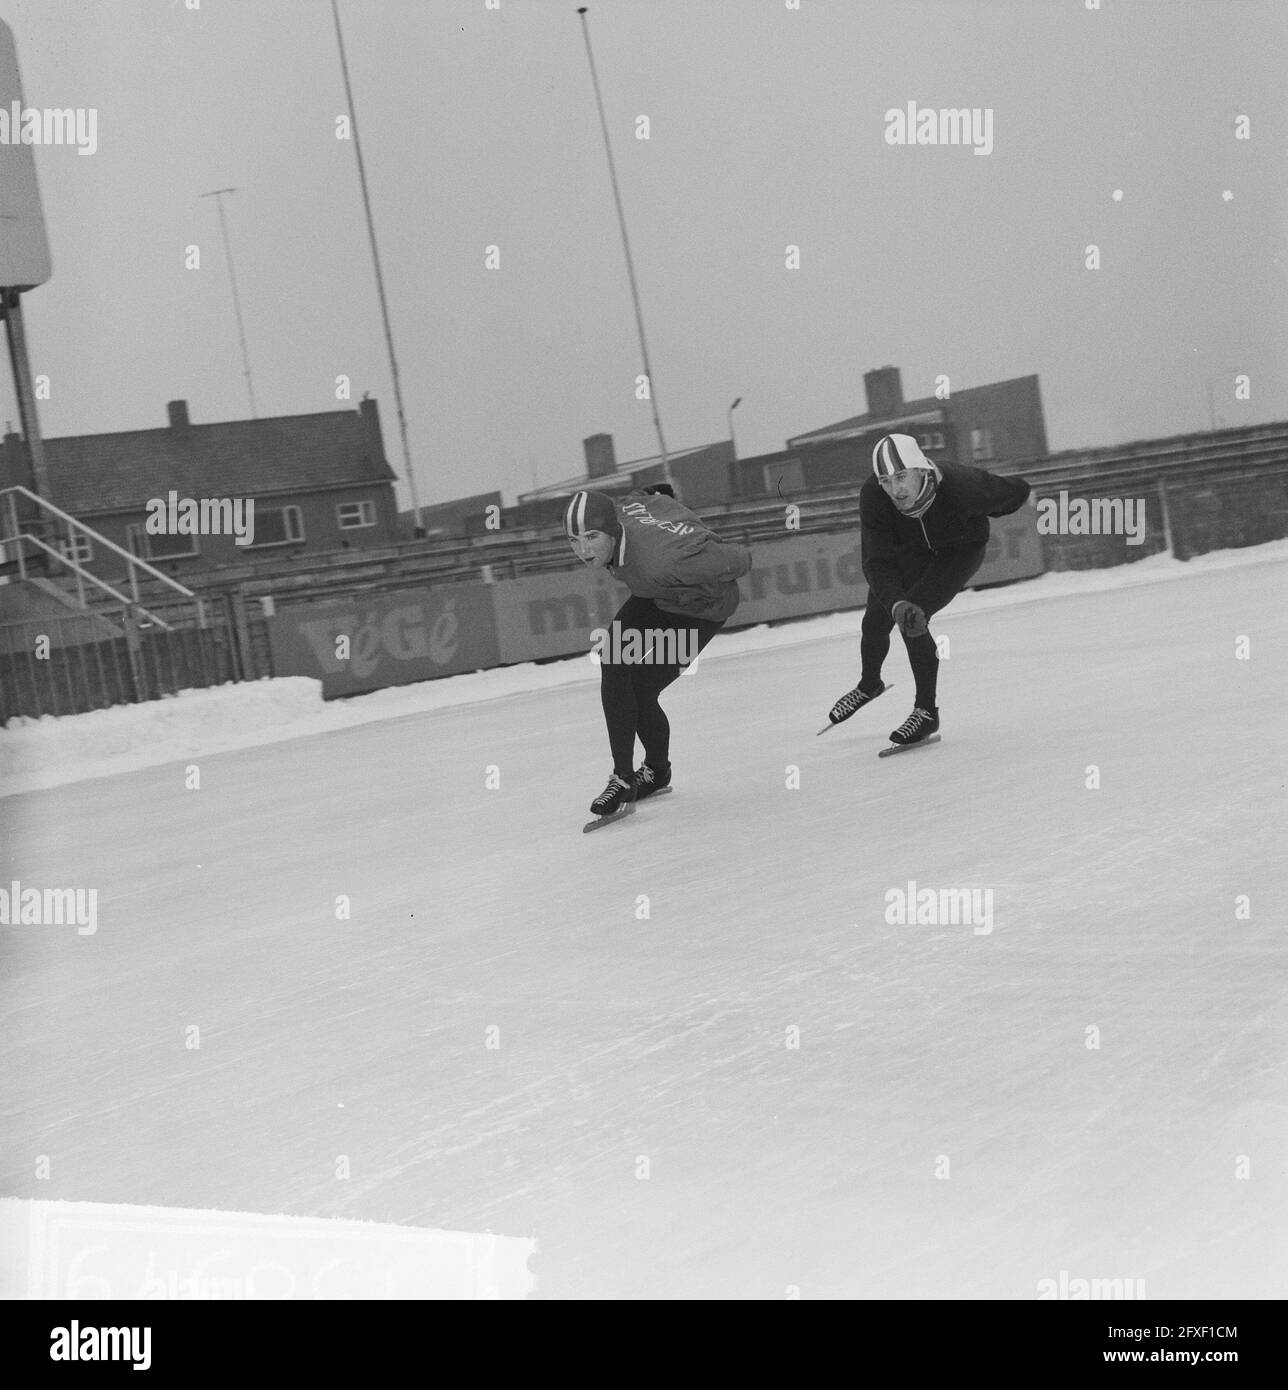 Training for the Dutch core team on the Deventer ice rink. In front Wim van Heyst, behind him P. Modder, December 12, 1963, SCHATSEN, sport, The Netherlands, 20th century press agency photo, news to remember, documentary, historic photography 1945-1990, visual stories, human history of the Twentieth Century, capturing moments in time Stock Photo